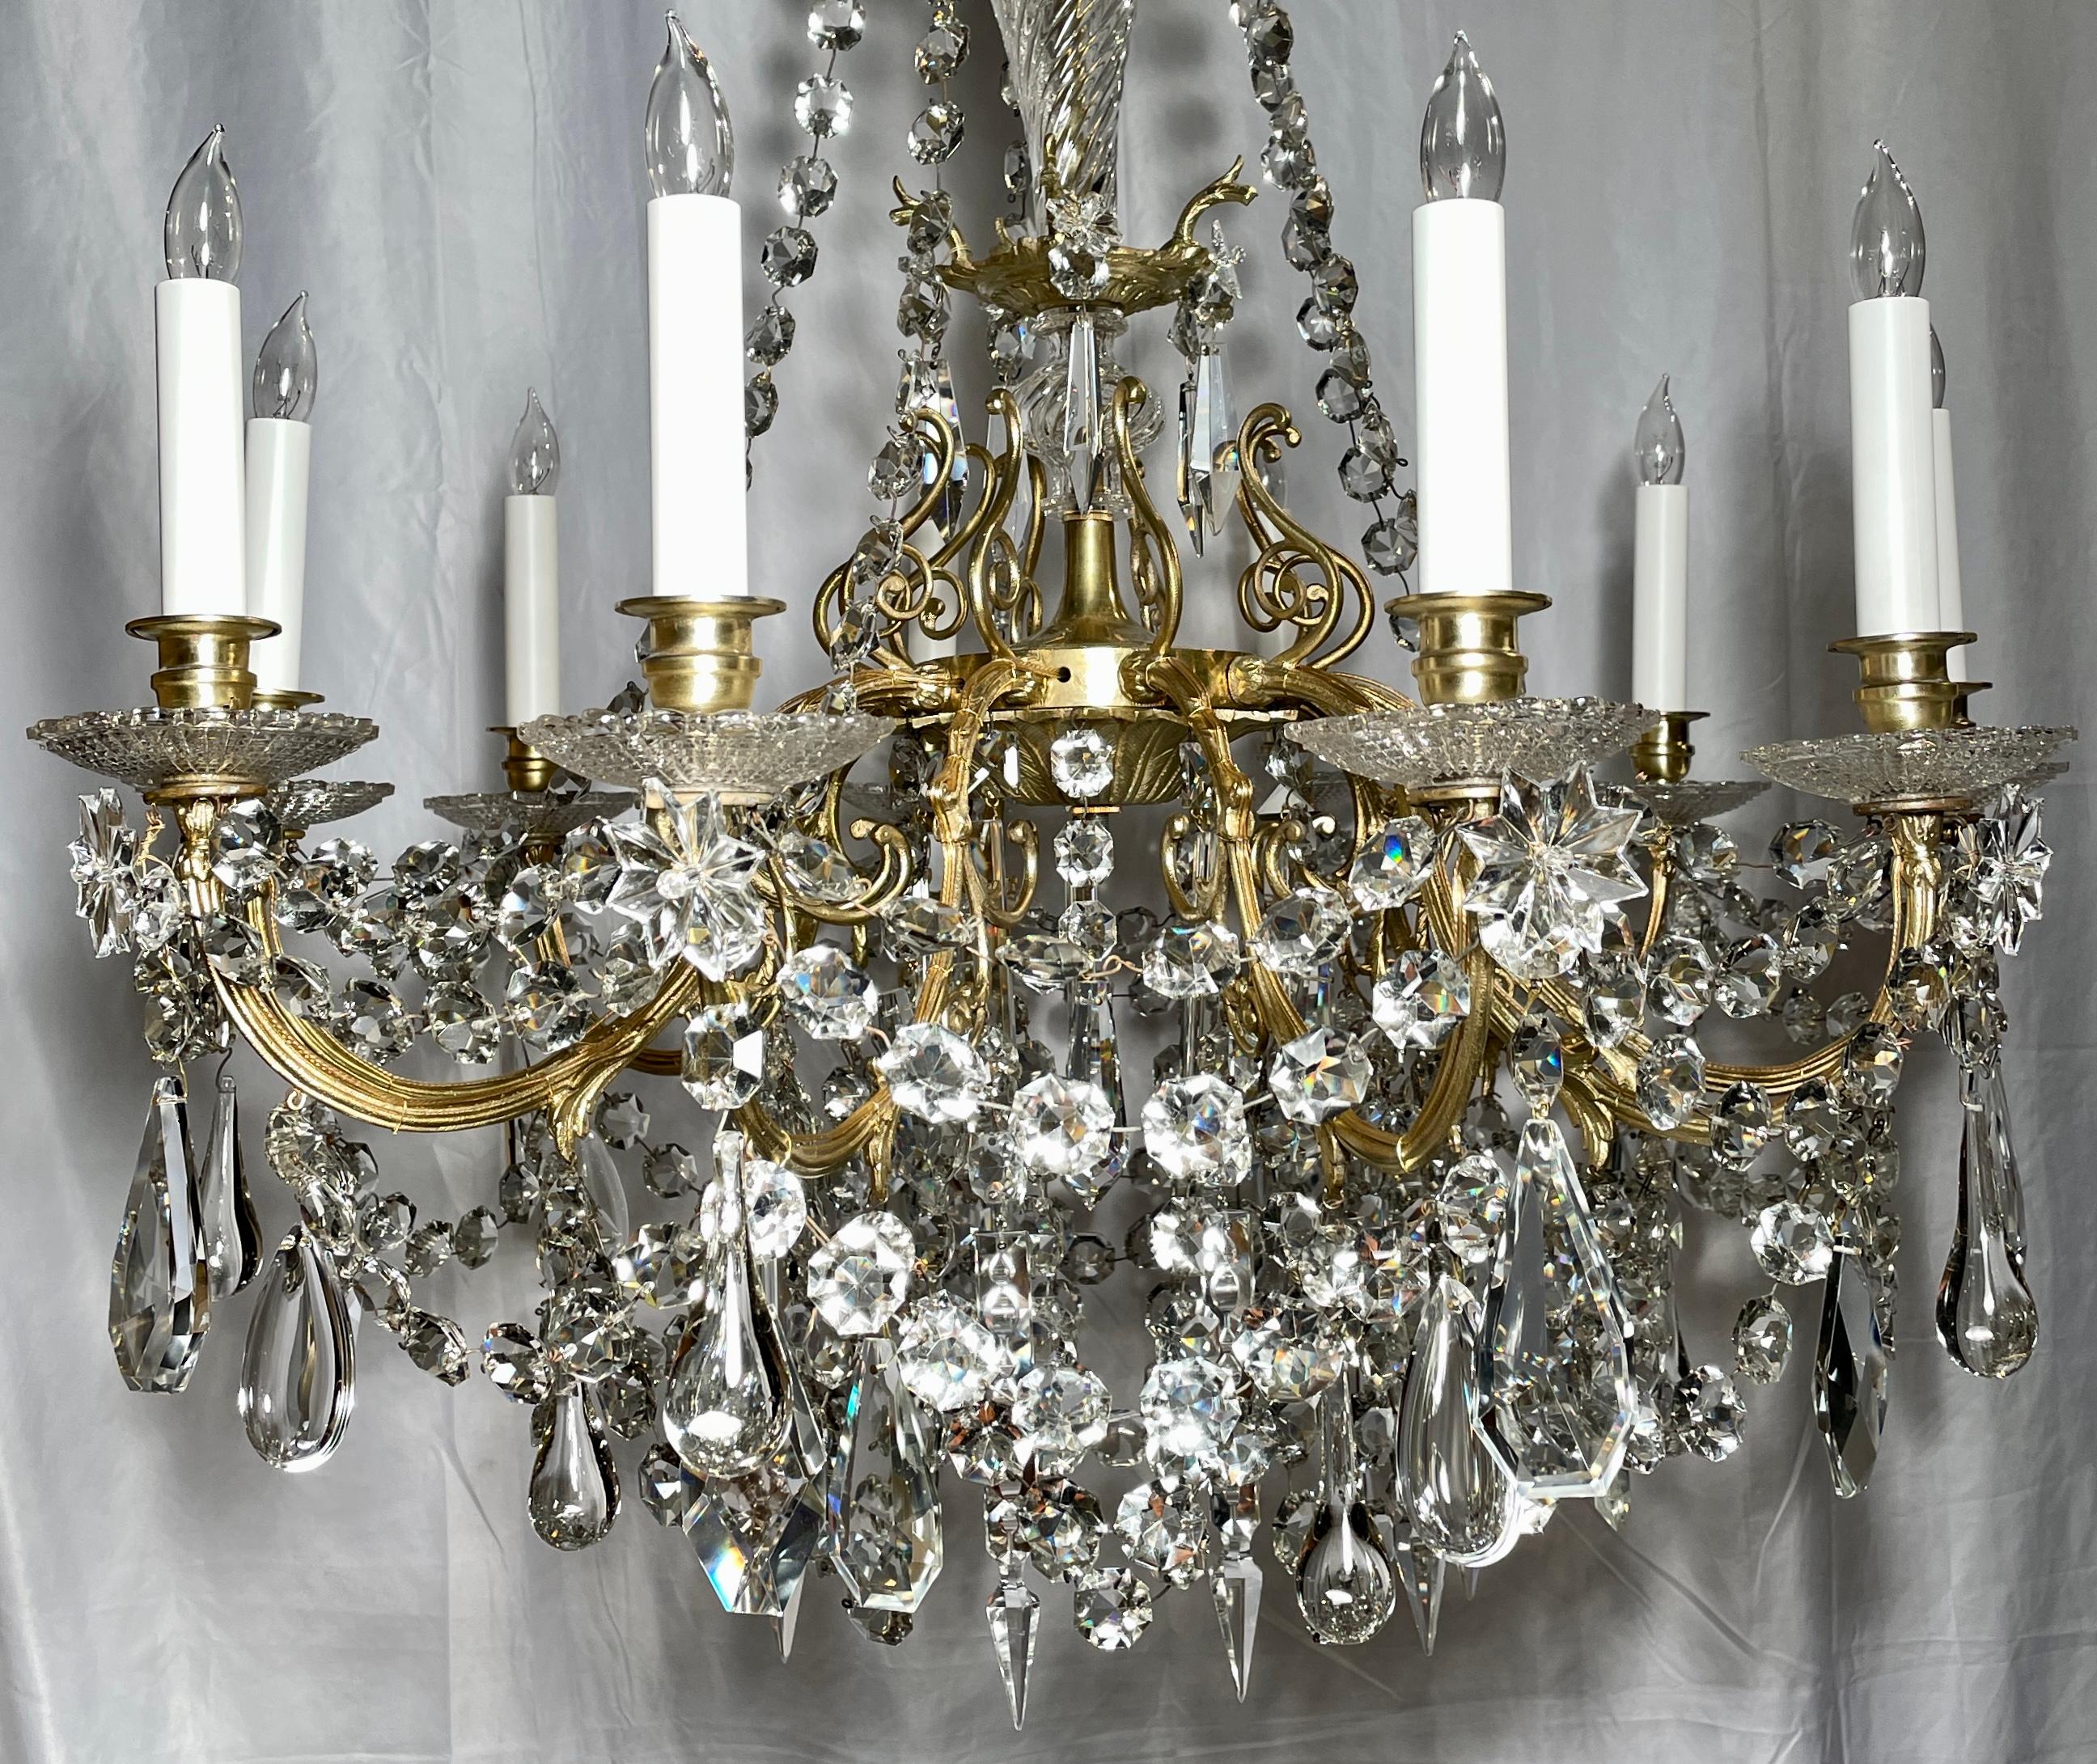 French Antique 19th Century Cut Crystal & Gold Bronze 10-Light Chandelier, circa 1890 For Sale